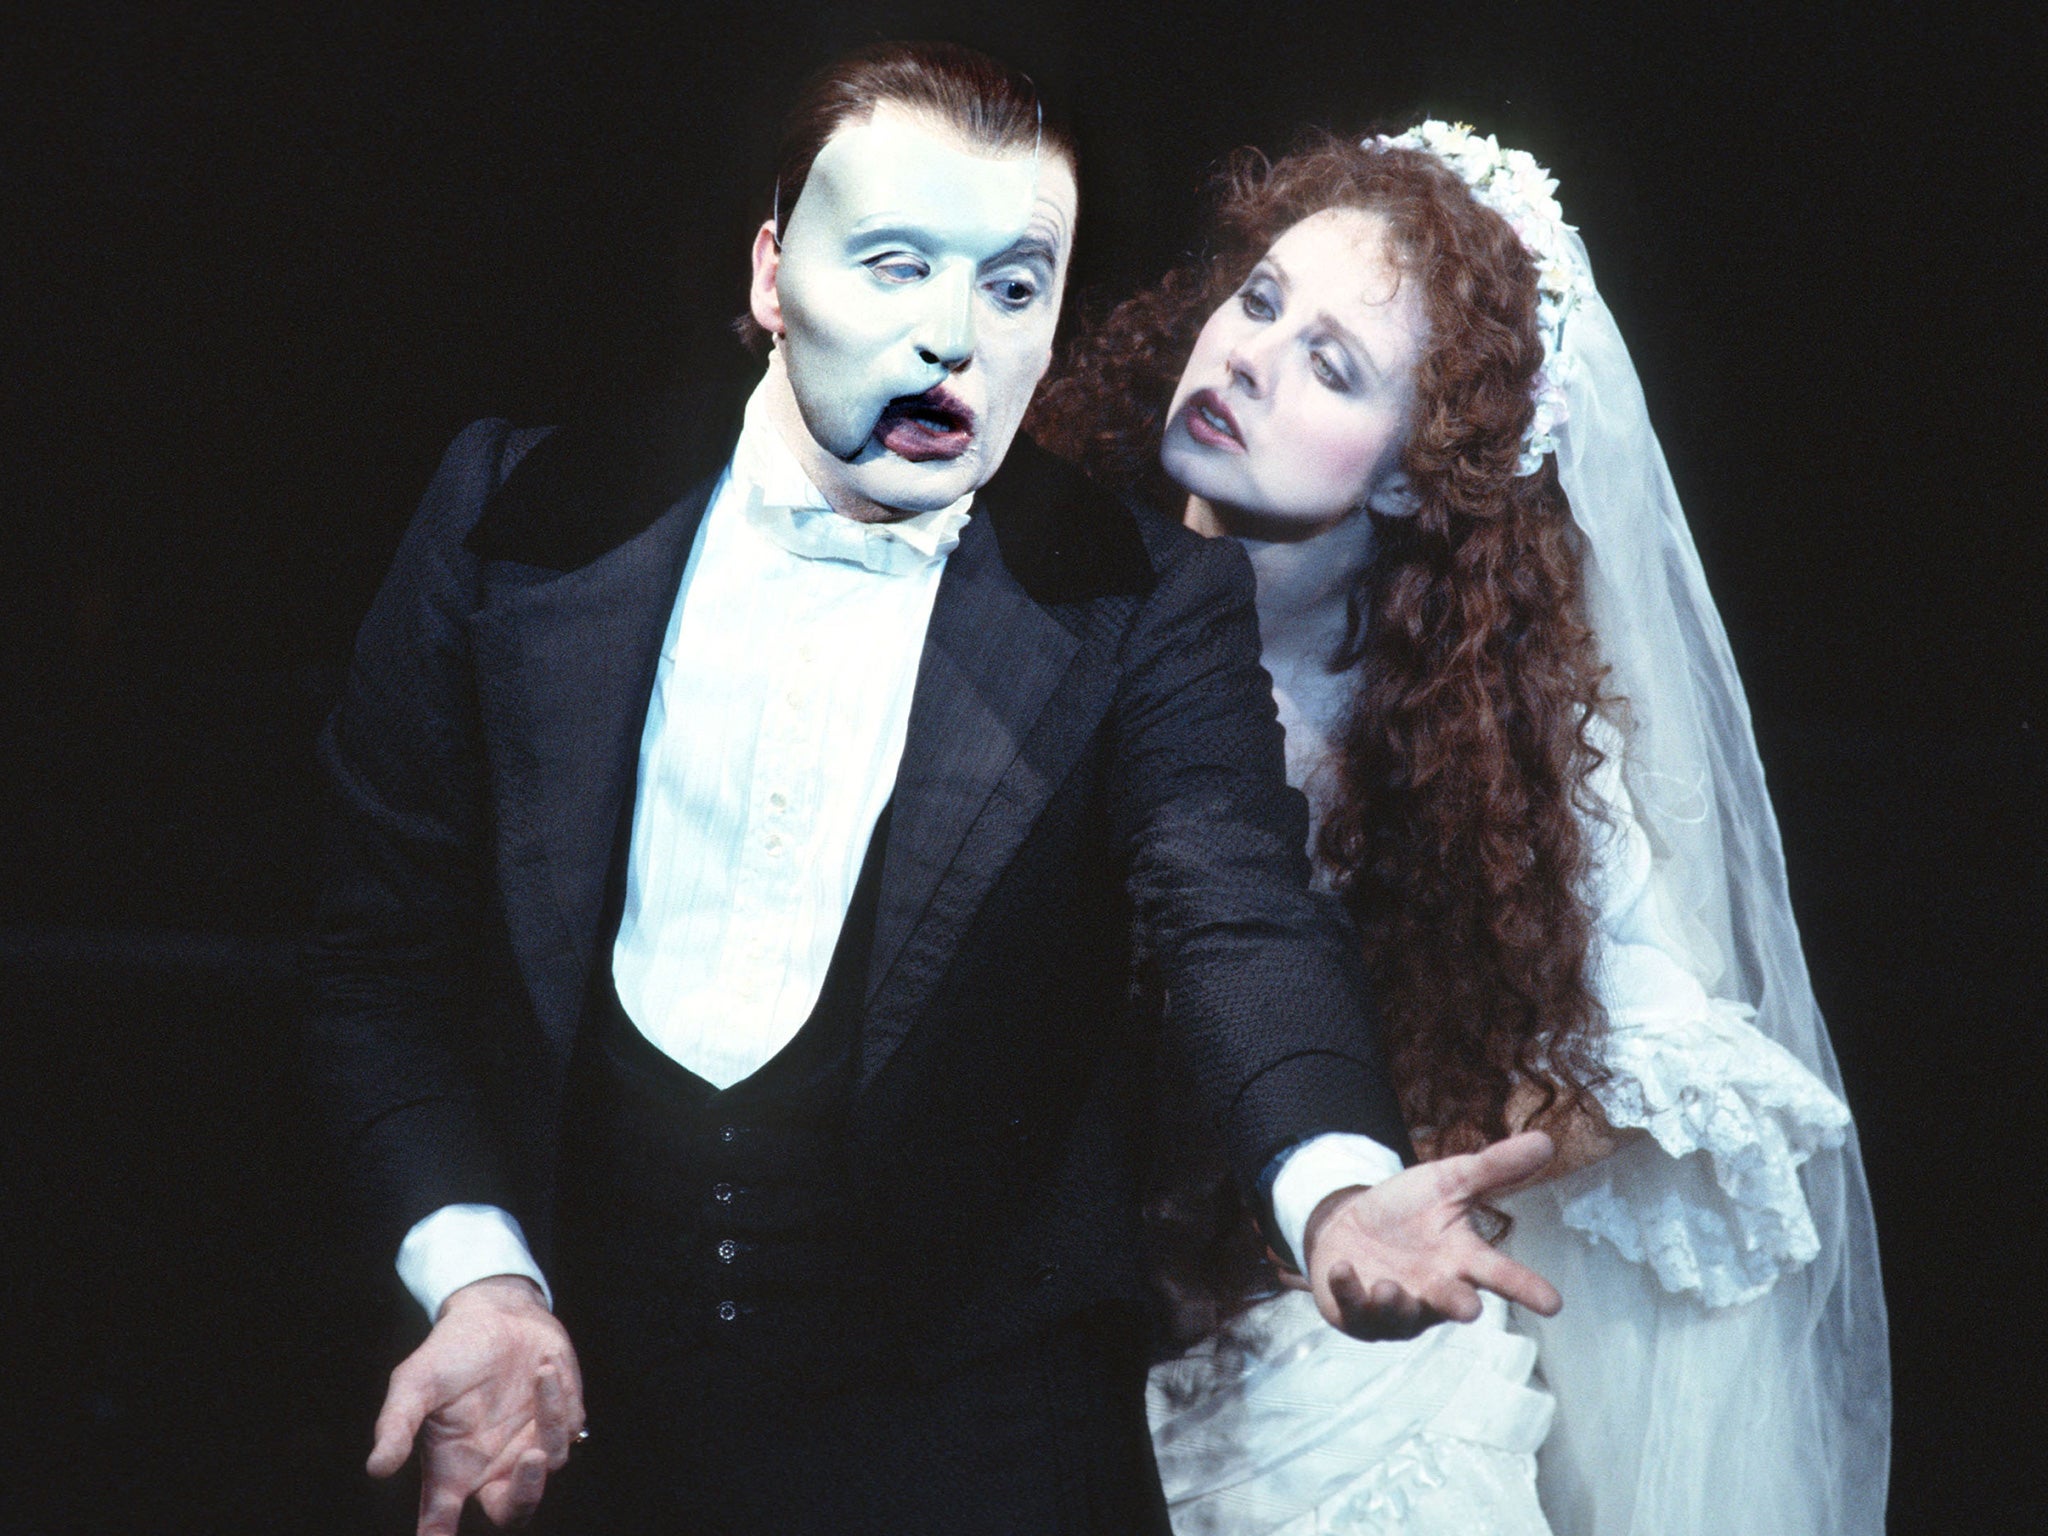 Sir Andrew said it would take months before a new production of ‘Phantom of the Opera’ is ready